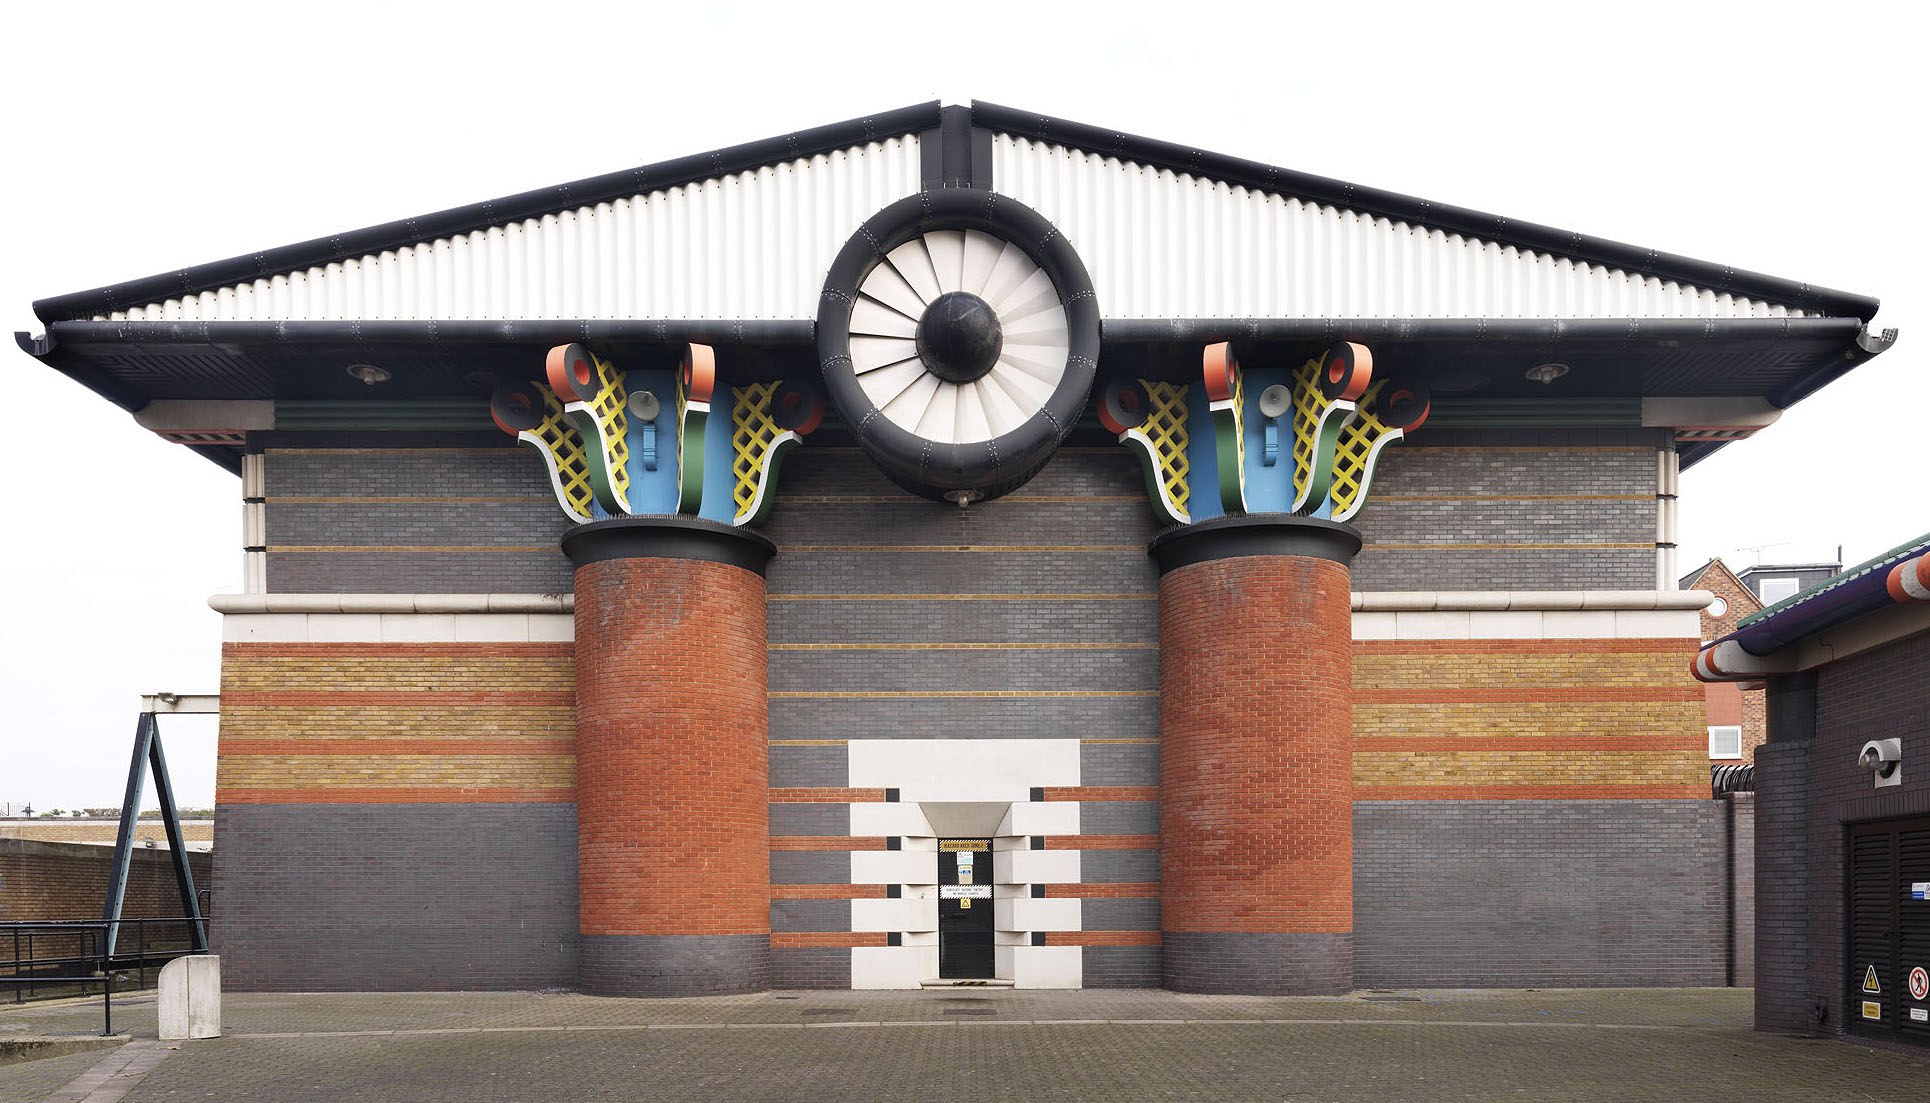 the egyptian inspired postmodern design of the isle of dogs pumping station, with outlandish yellow, blue and red columns plus red, yellow and brown brick